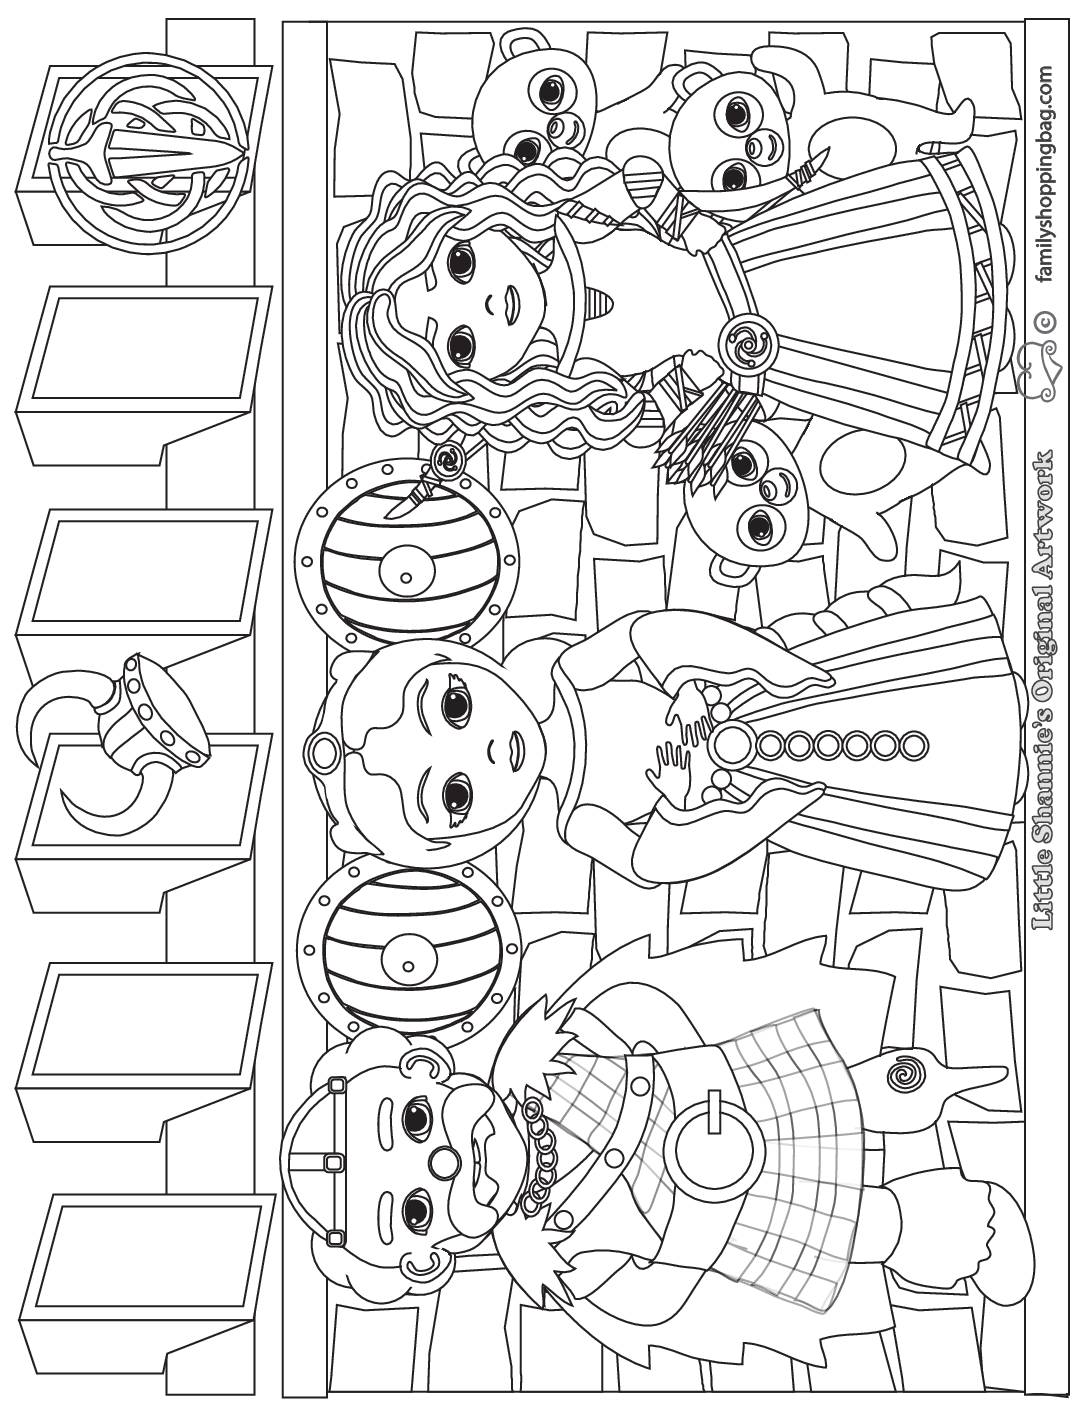 Coloring Page Brave Coloring Pages